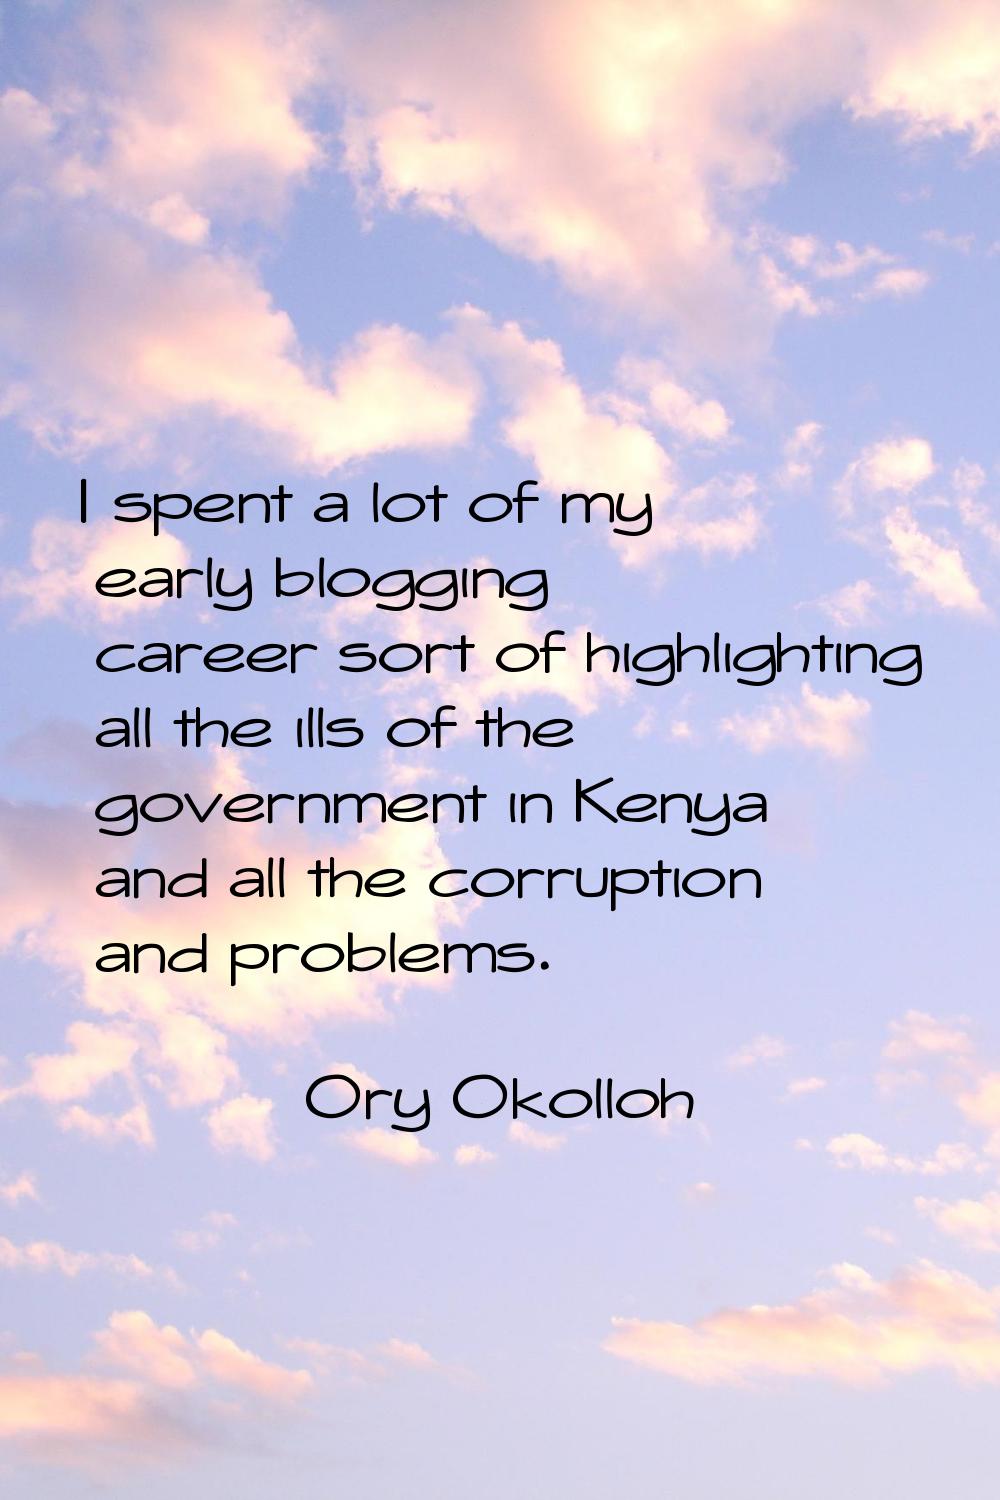 I spent a lot of my early blogging career sort of highlighting all the ills of the government in Ke